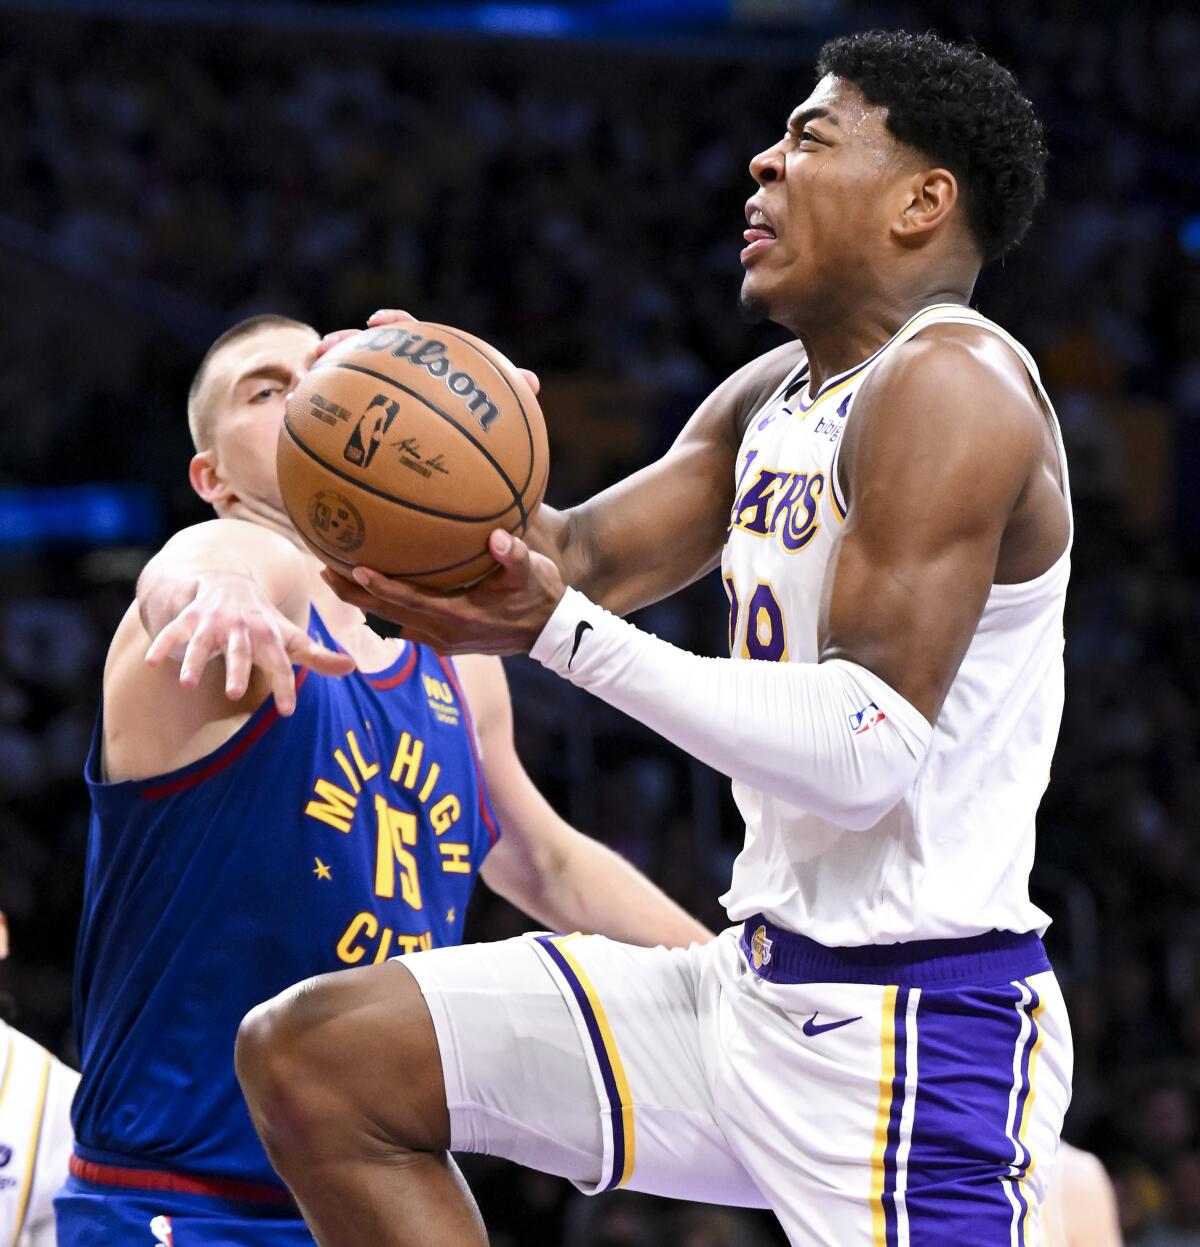 Lakers forward Rui Hachimura, right, elevates for a layup while Nuggets center Nikola Jokic takes a swipe at the ball.